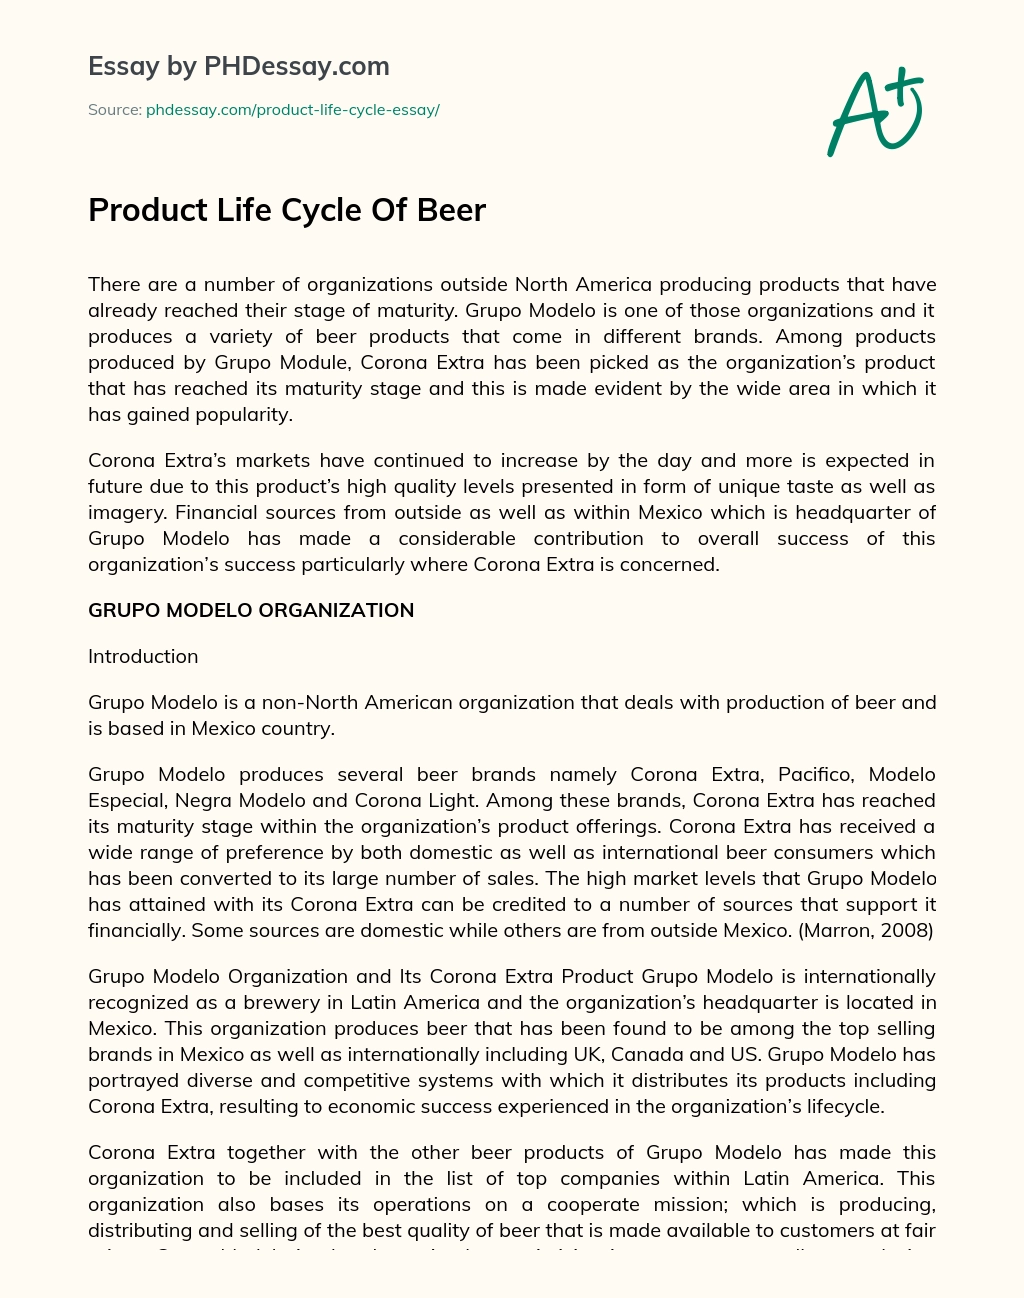 Product Life Cycle Of Beer essay